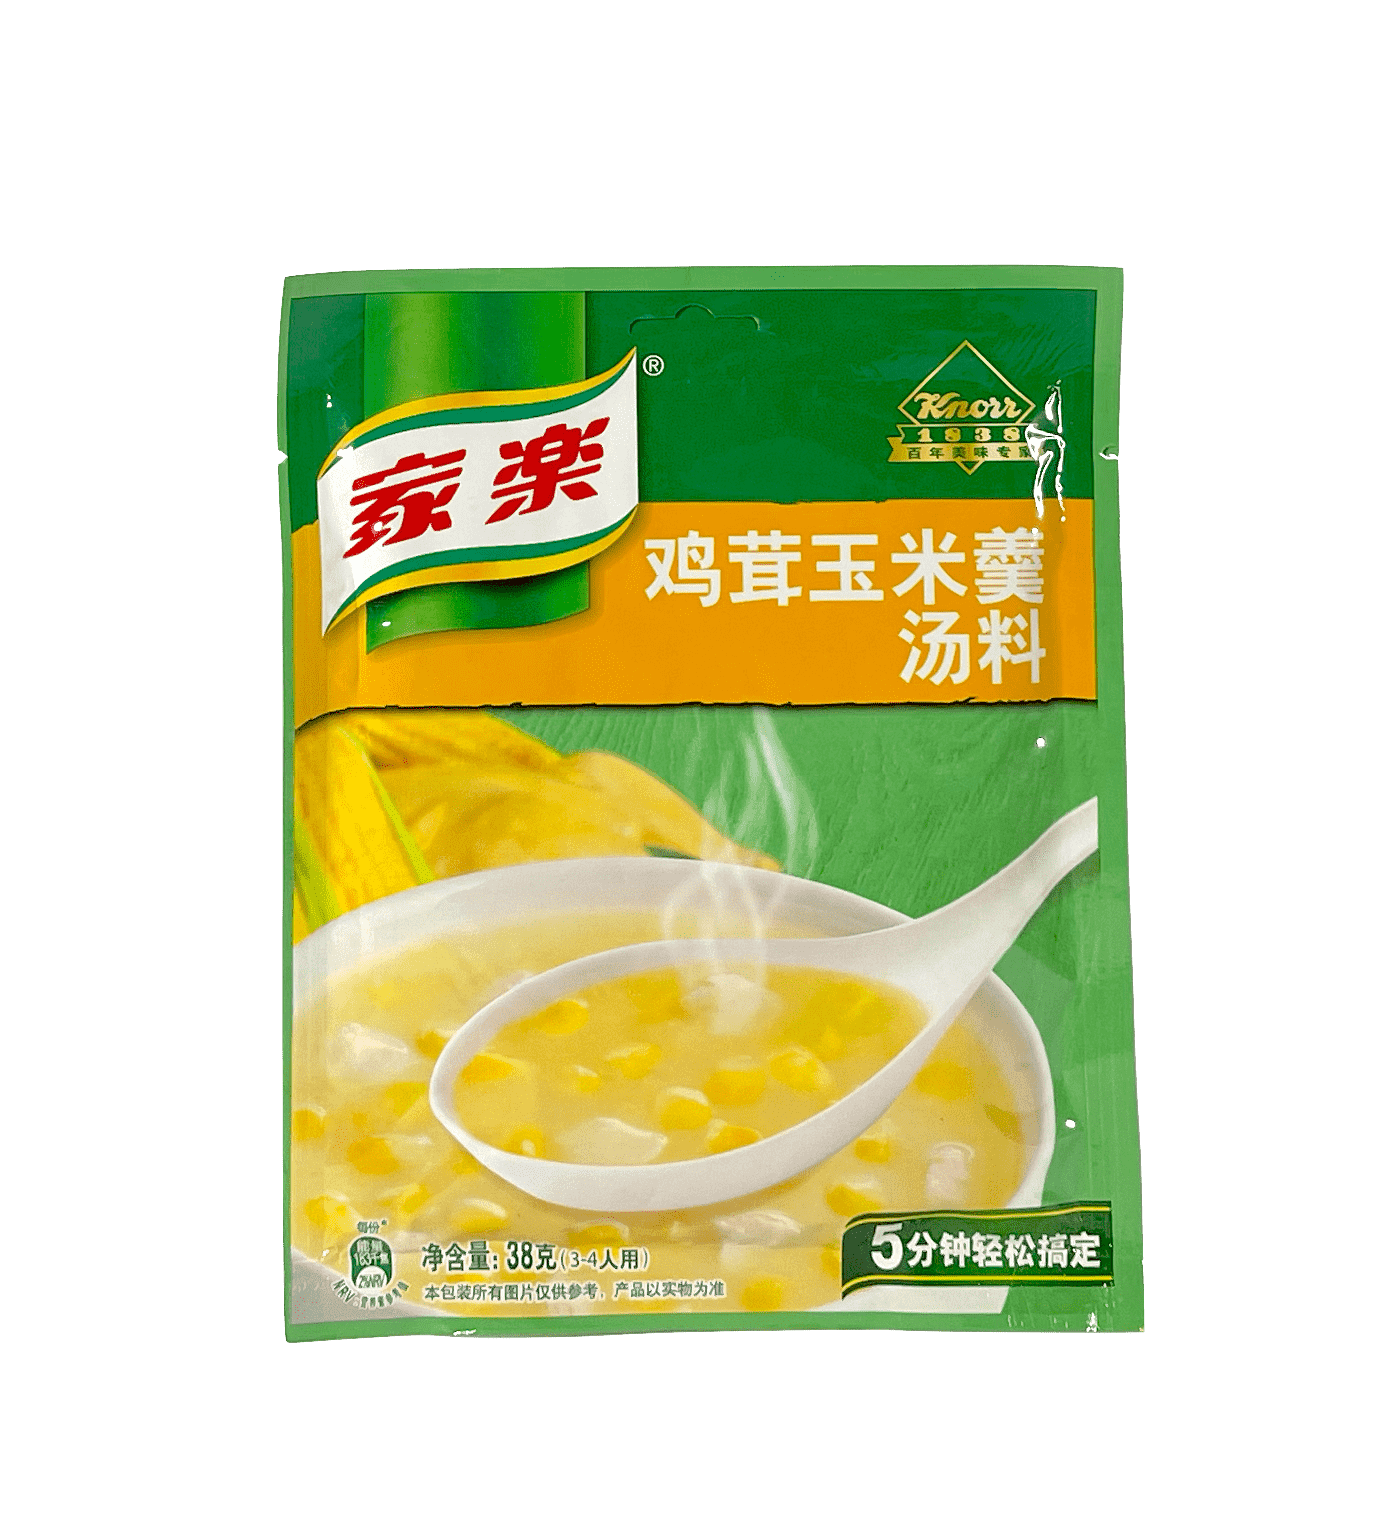 Instant Soup With Chicken / Corn Flavor for 3-4portions 38g/pcs Jia Le China